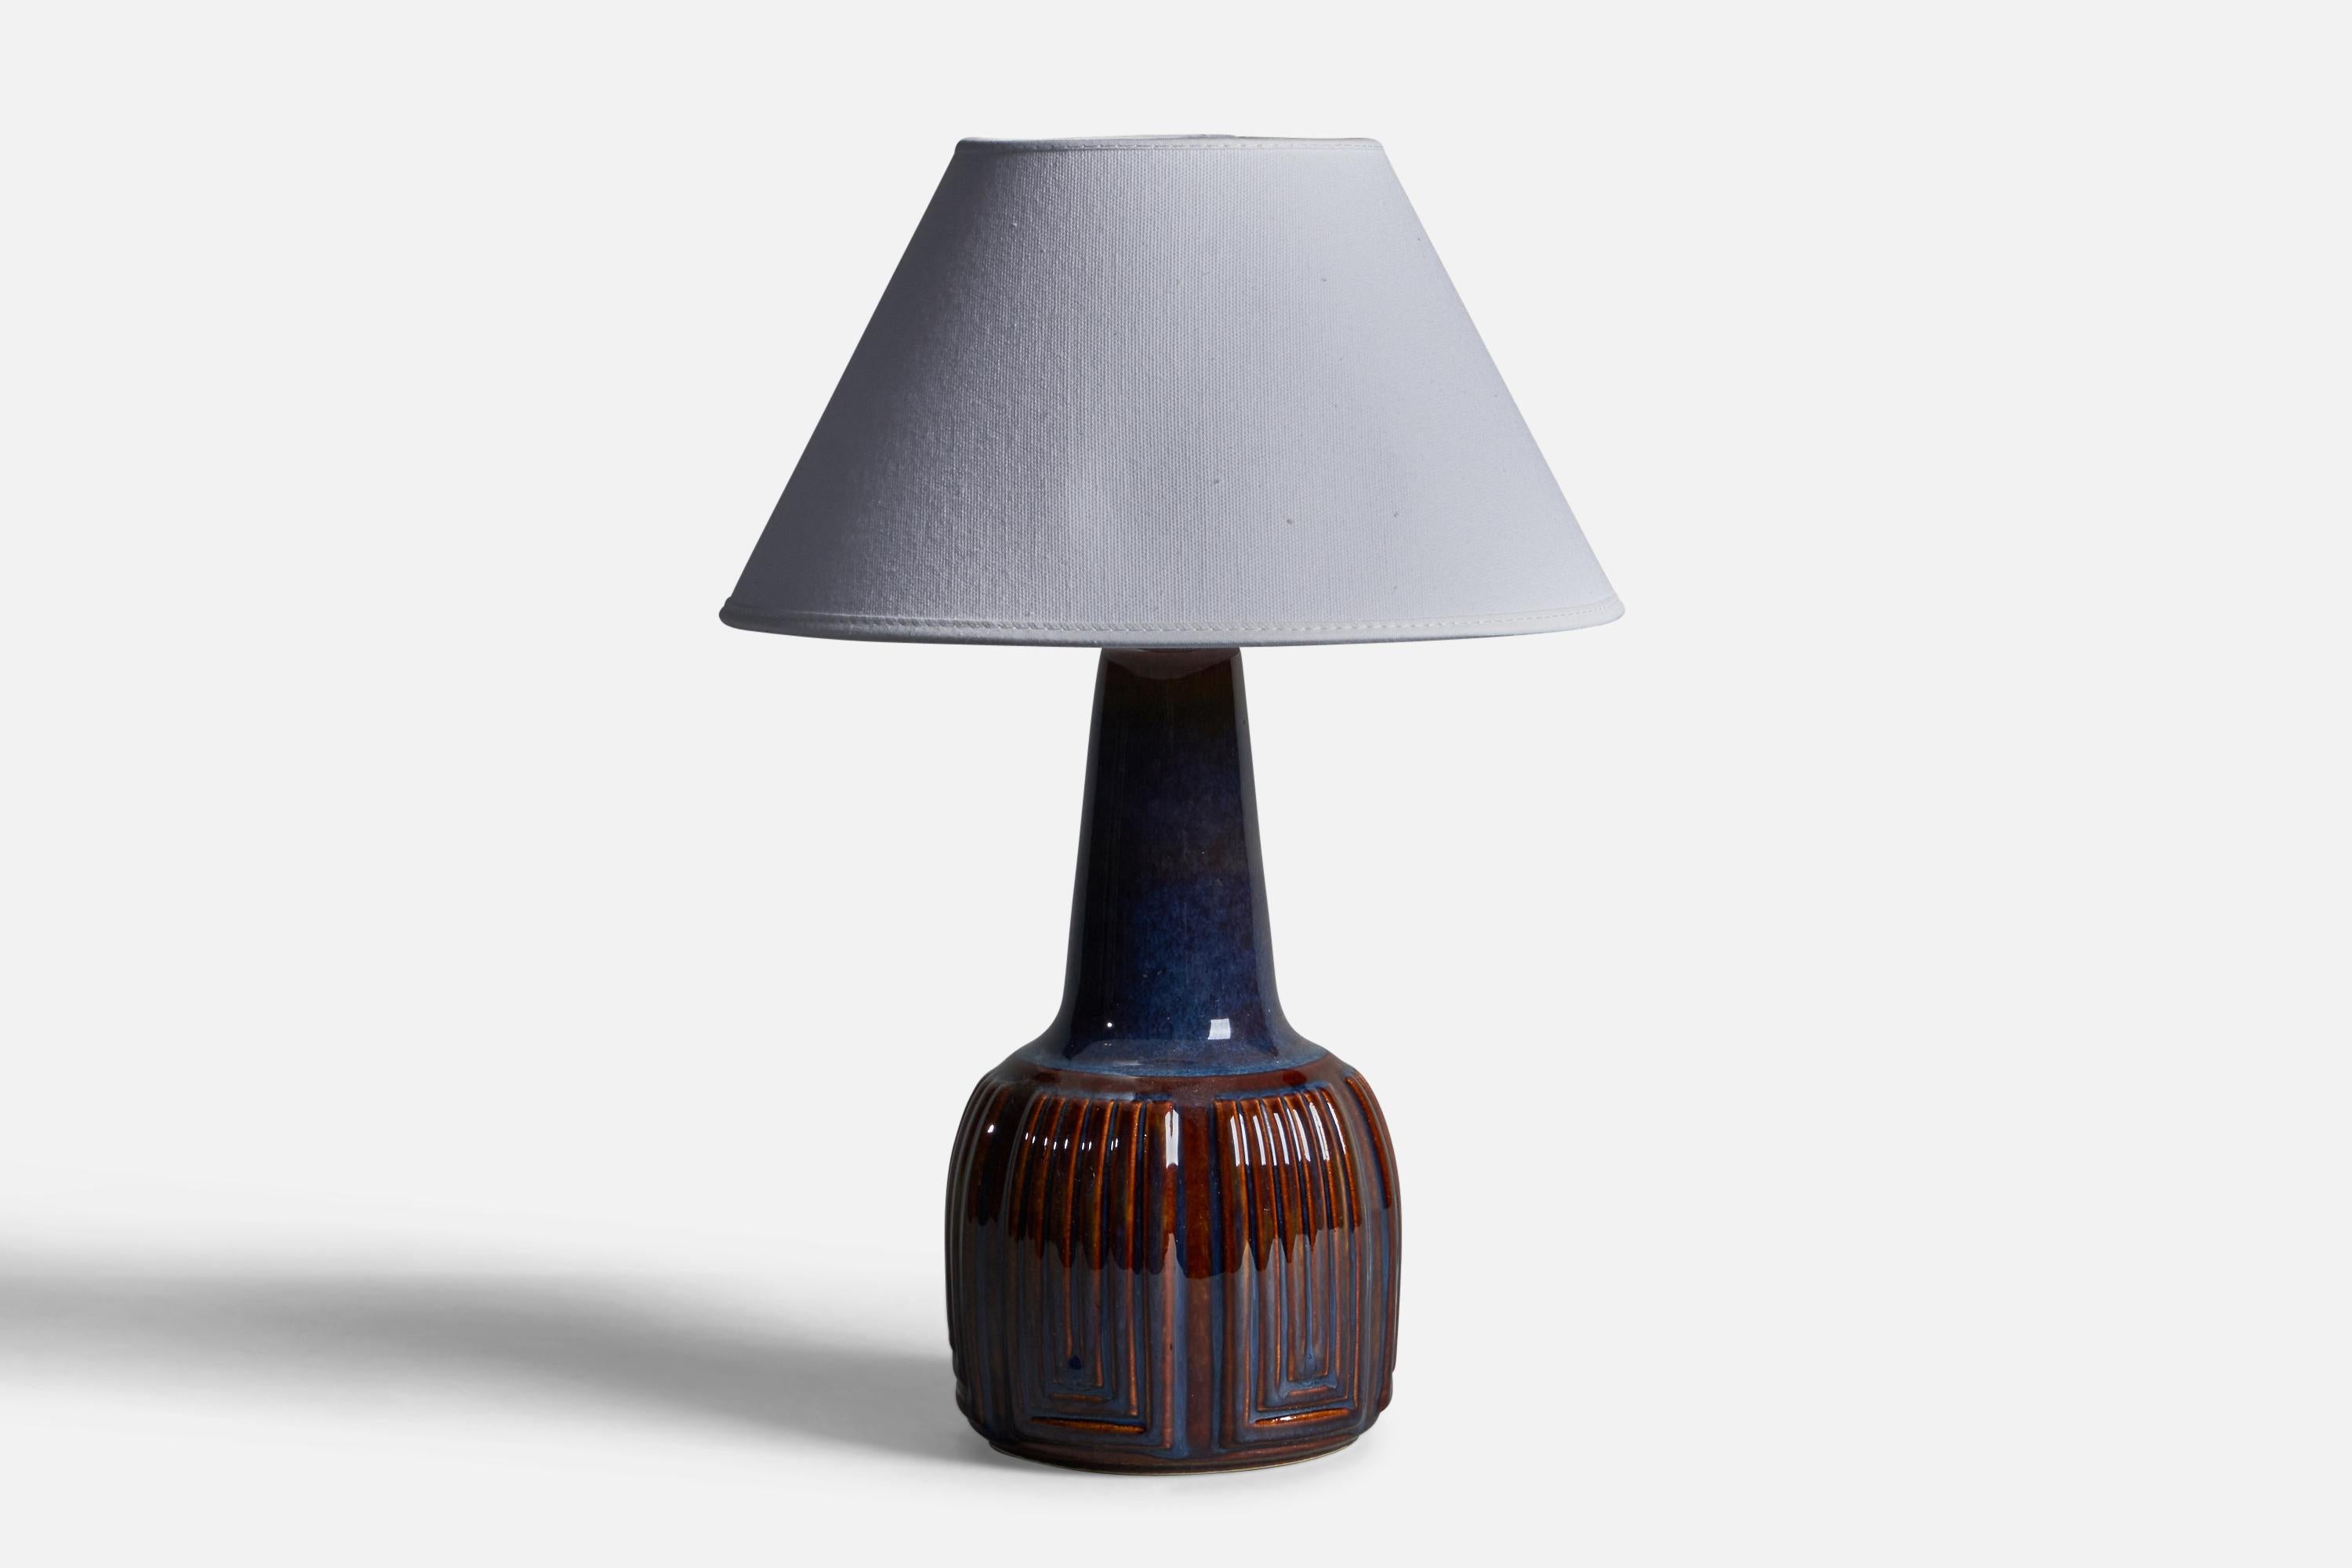 A blue-glazed stoneware table lamp designed and produced by  Søholm, Bornholm, Denmark, 1960s.

Dimensions of Lamp (inches): 11.5